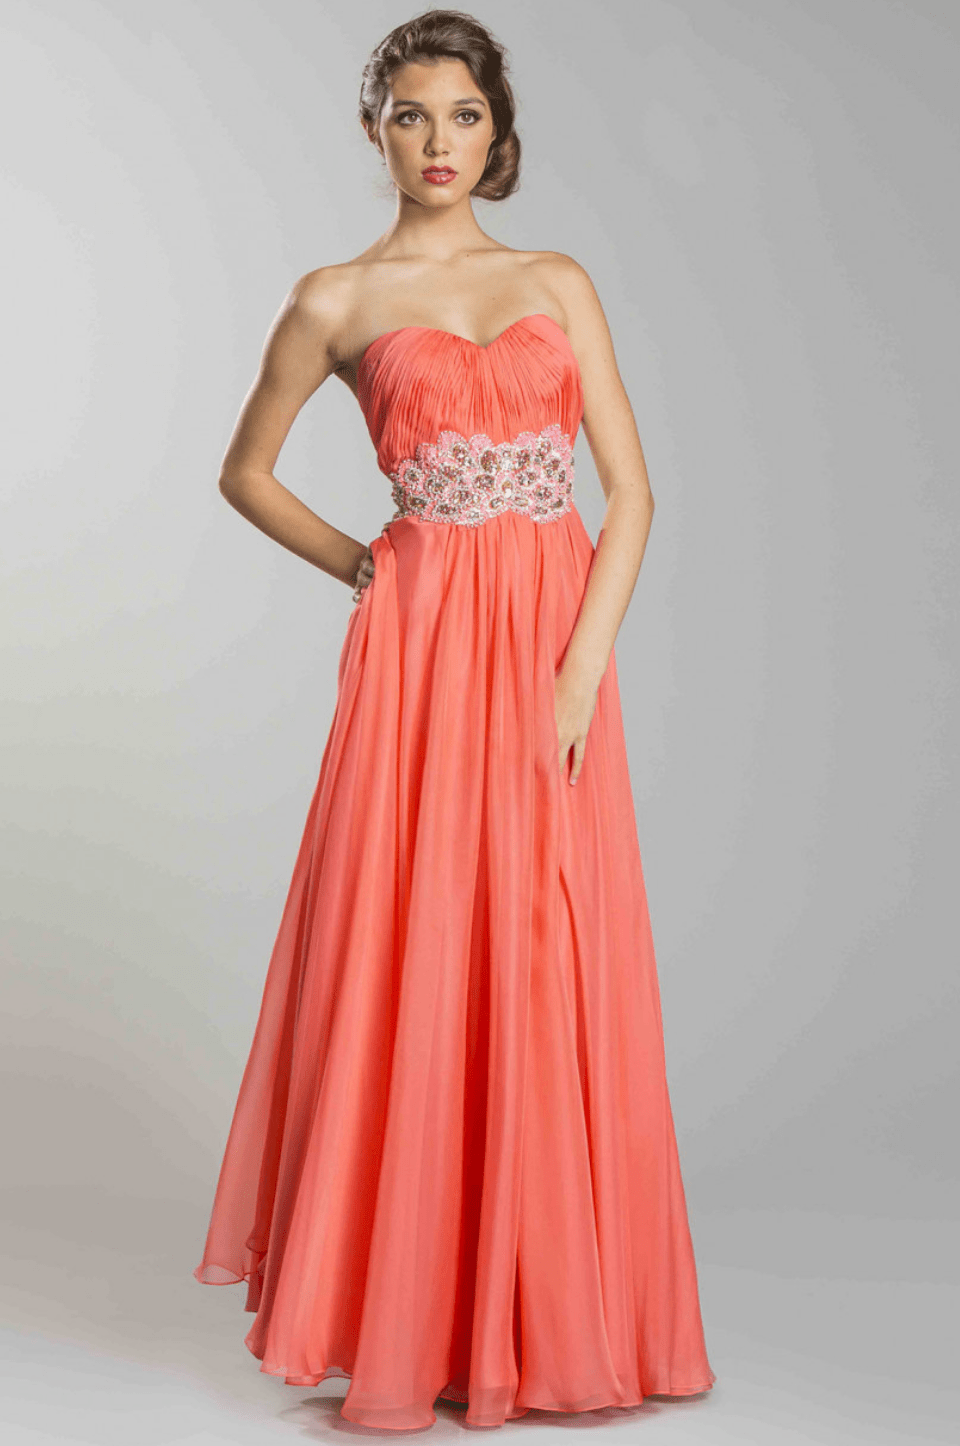 Strapless Beaded Chiffon Dress by Aspeed - NORMA REED